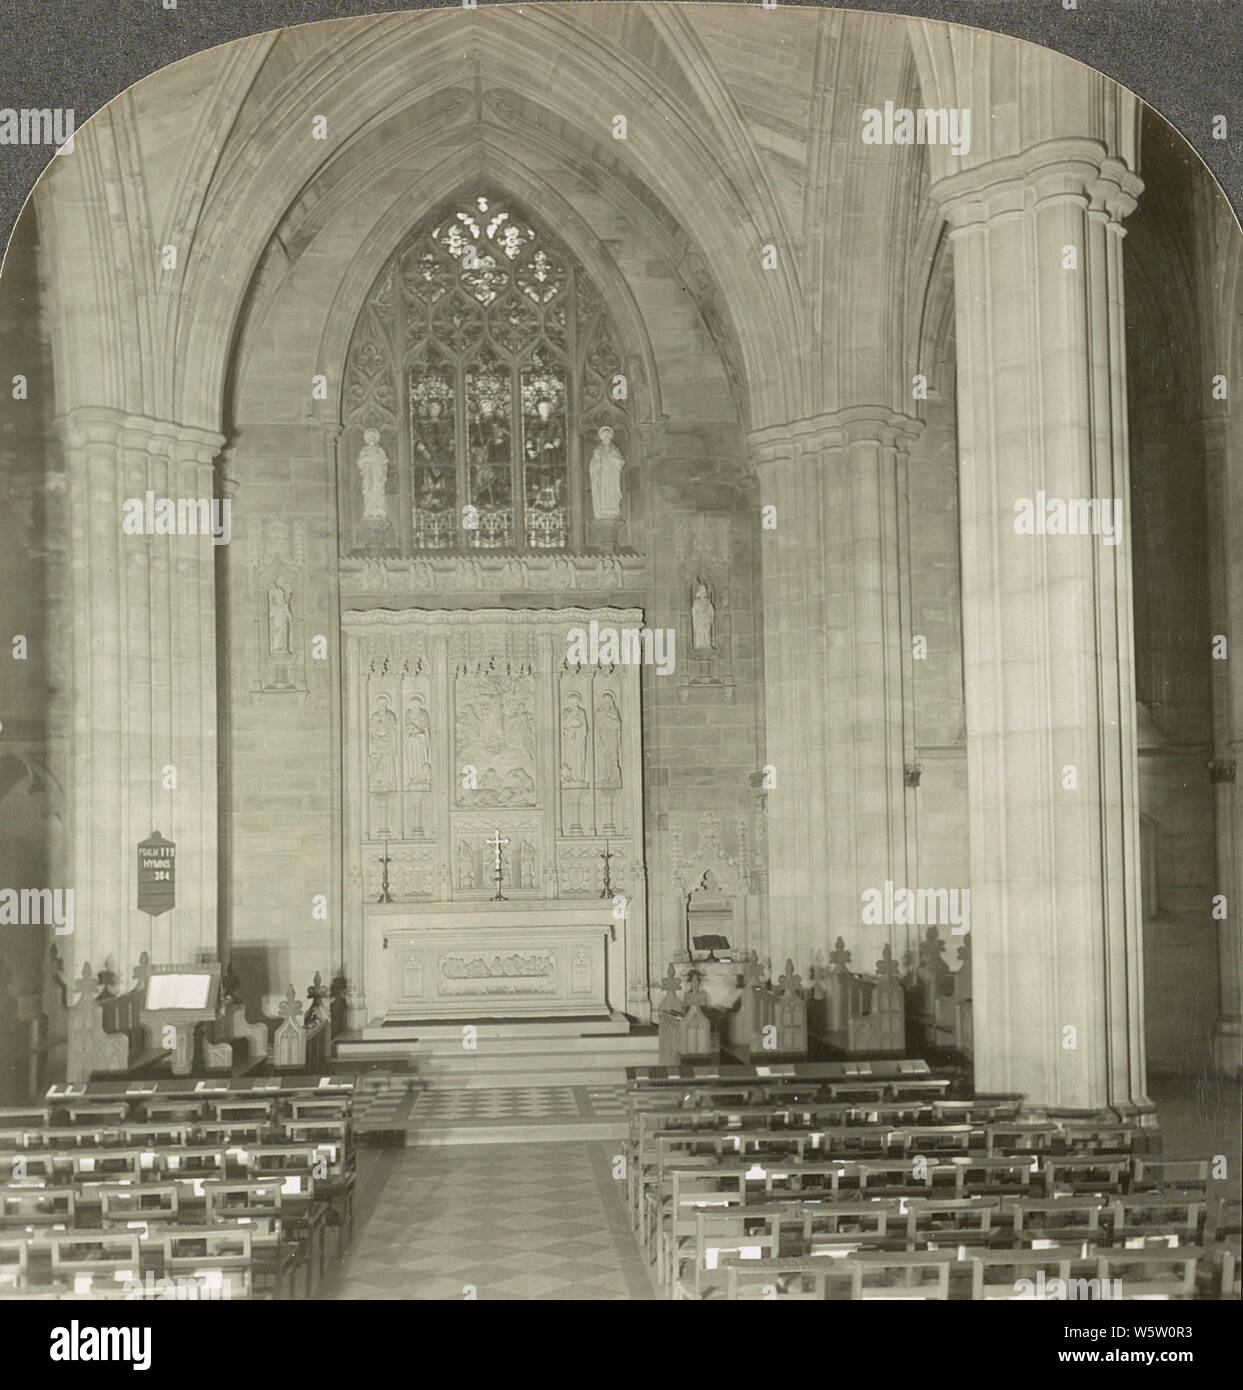 The Chapel of St. James, Cathedral of St. John the Divine, New York in 1920s. The Cathedral of Saint John the Divine is the cathedral of the Episcopal Diocese of New York. It is located in New York City at 1047 Amsterdam Avenue between West 110th Street and 113th Street in Manhattan's Morningside Heights neighborhood. Designed in 1888 and begun in 1892, the cathedral has undergone radical stylistic changes and interruption of construction by the two World Wars. Stock Photo